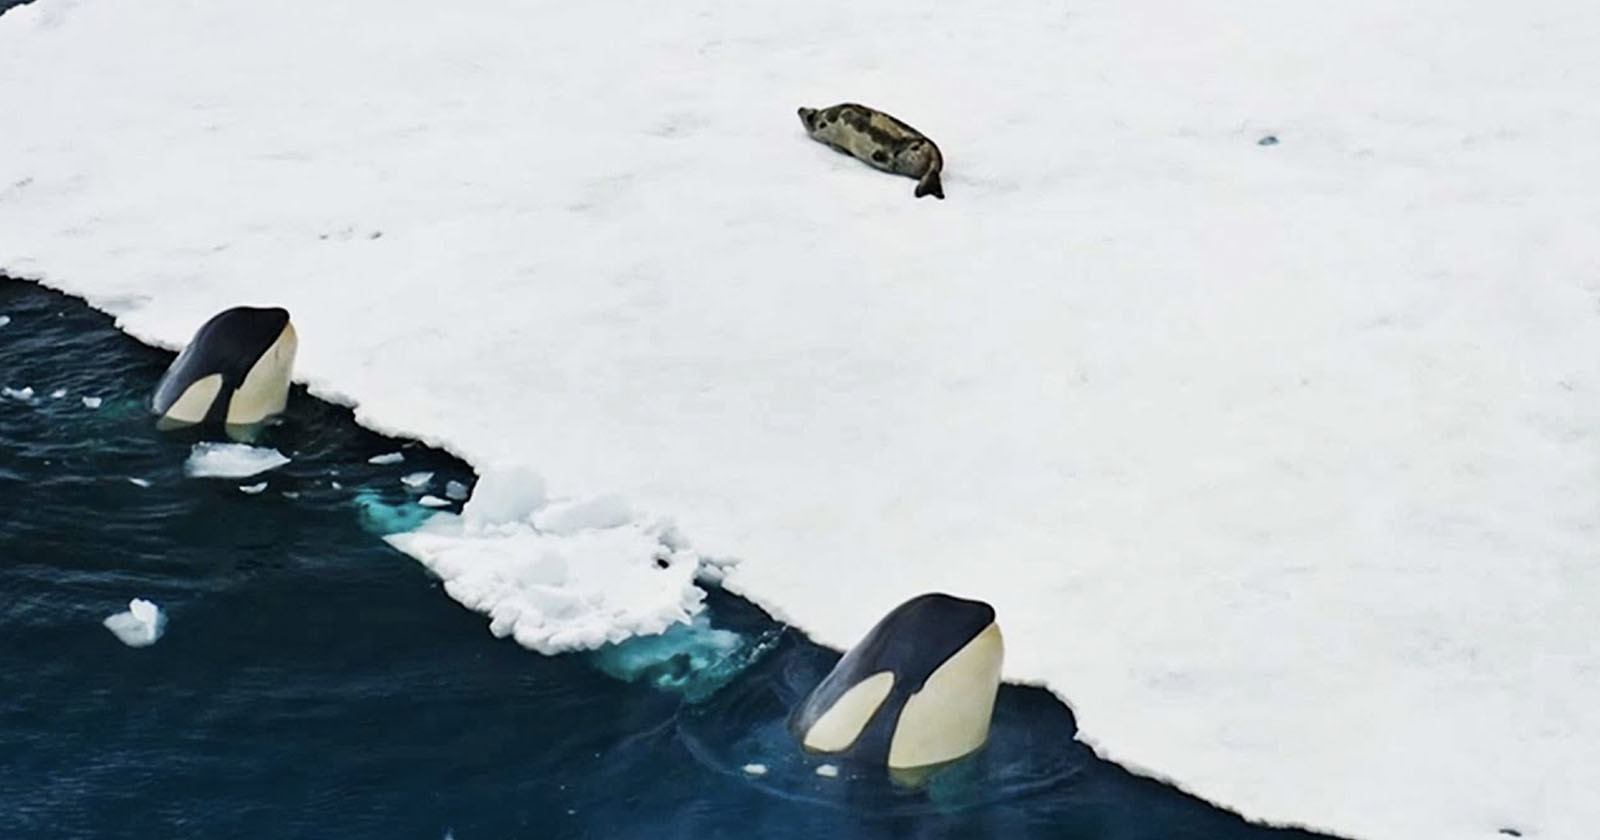  drones capture orcas hunting seal from air 